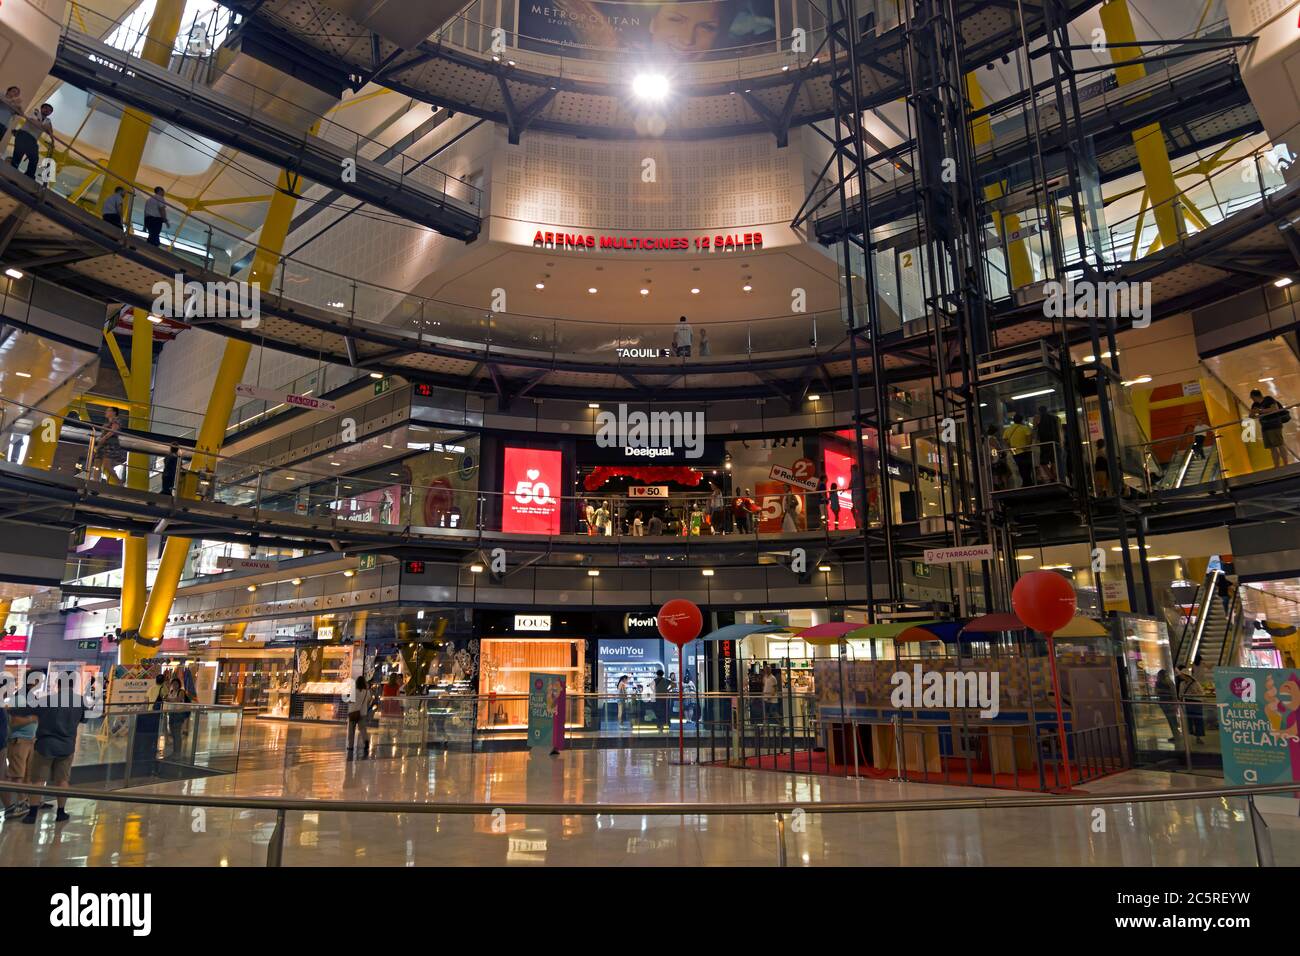 BARCELONA, SPAIN - JULY 8, 2015: Interior of the Las Arenas shopping centre,  former bullring of Las Arenas in Barcelona, Spain. Barcelona, Spain - Ju  Stock Photo - Alamy